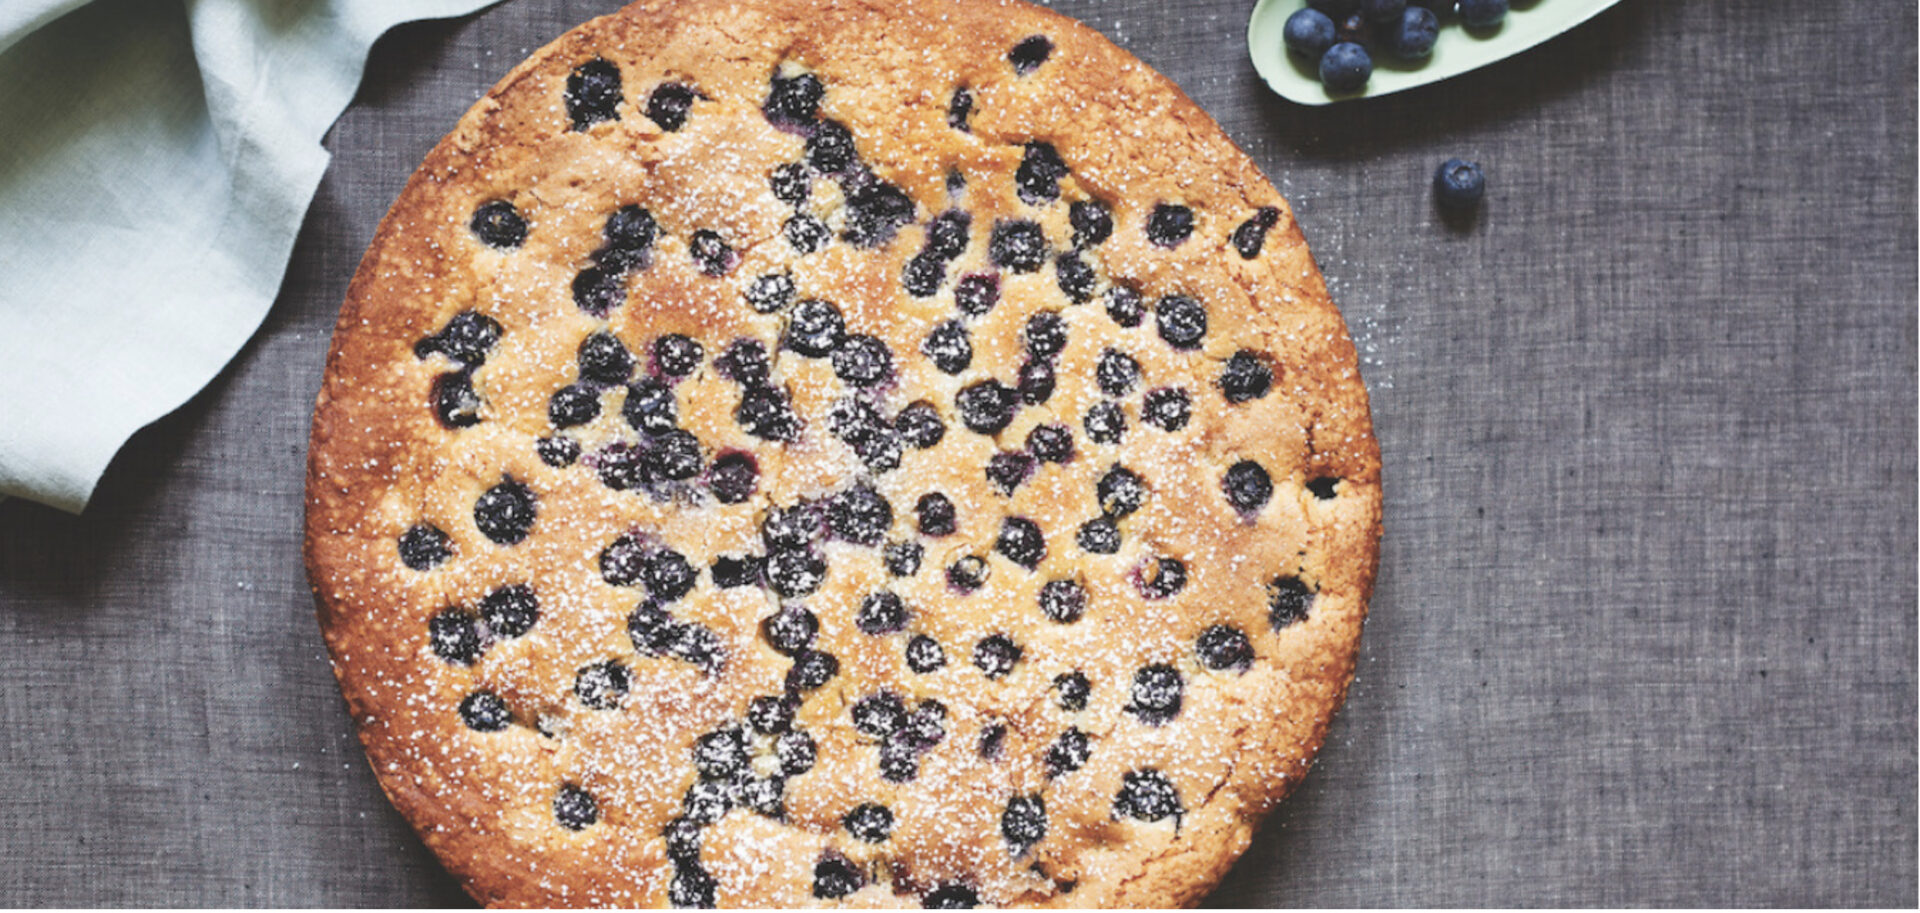 Blueberry lemon ricotta cake on a grey background with stray berries on the side and a light blue napkin